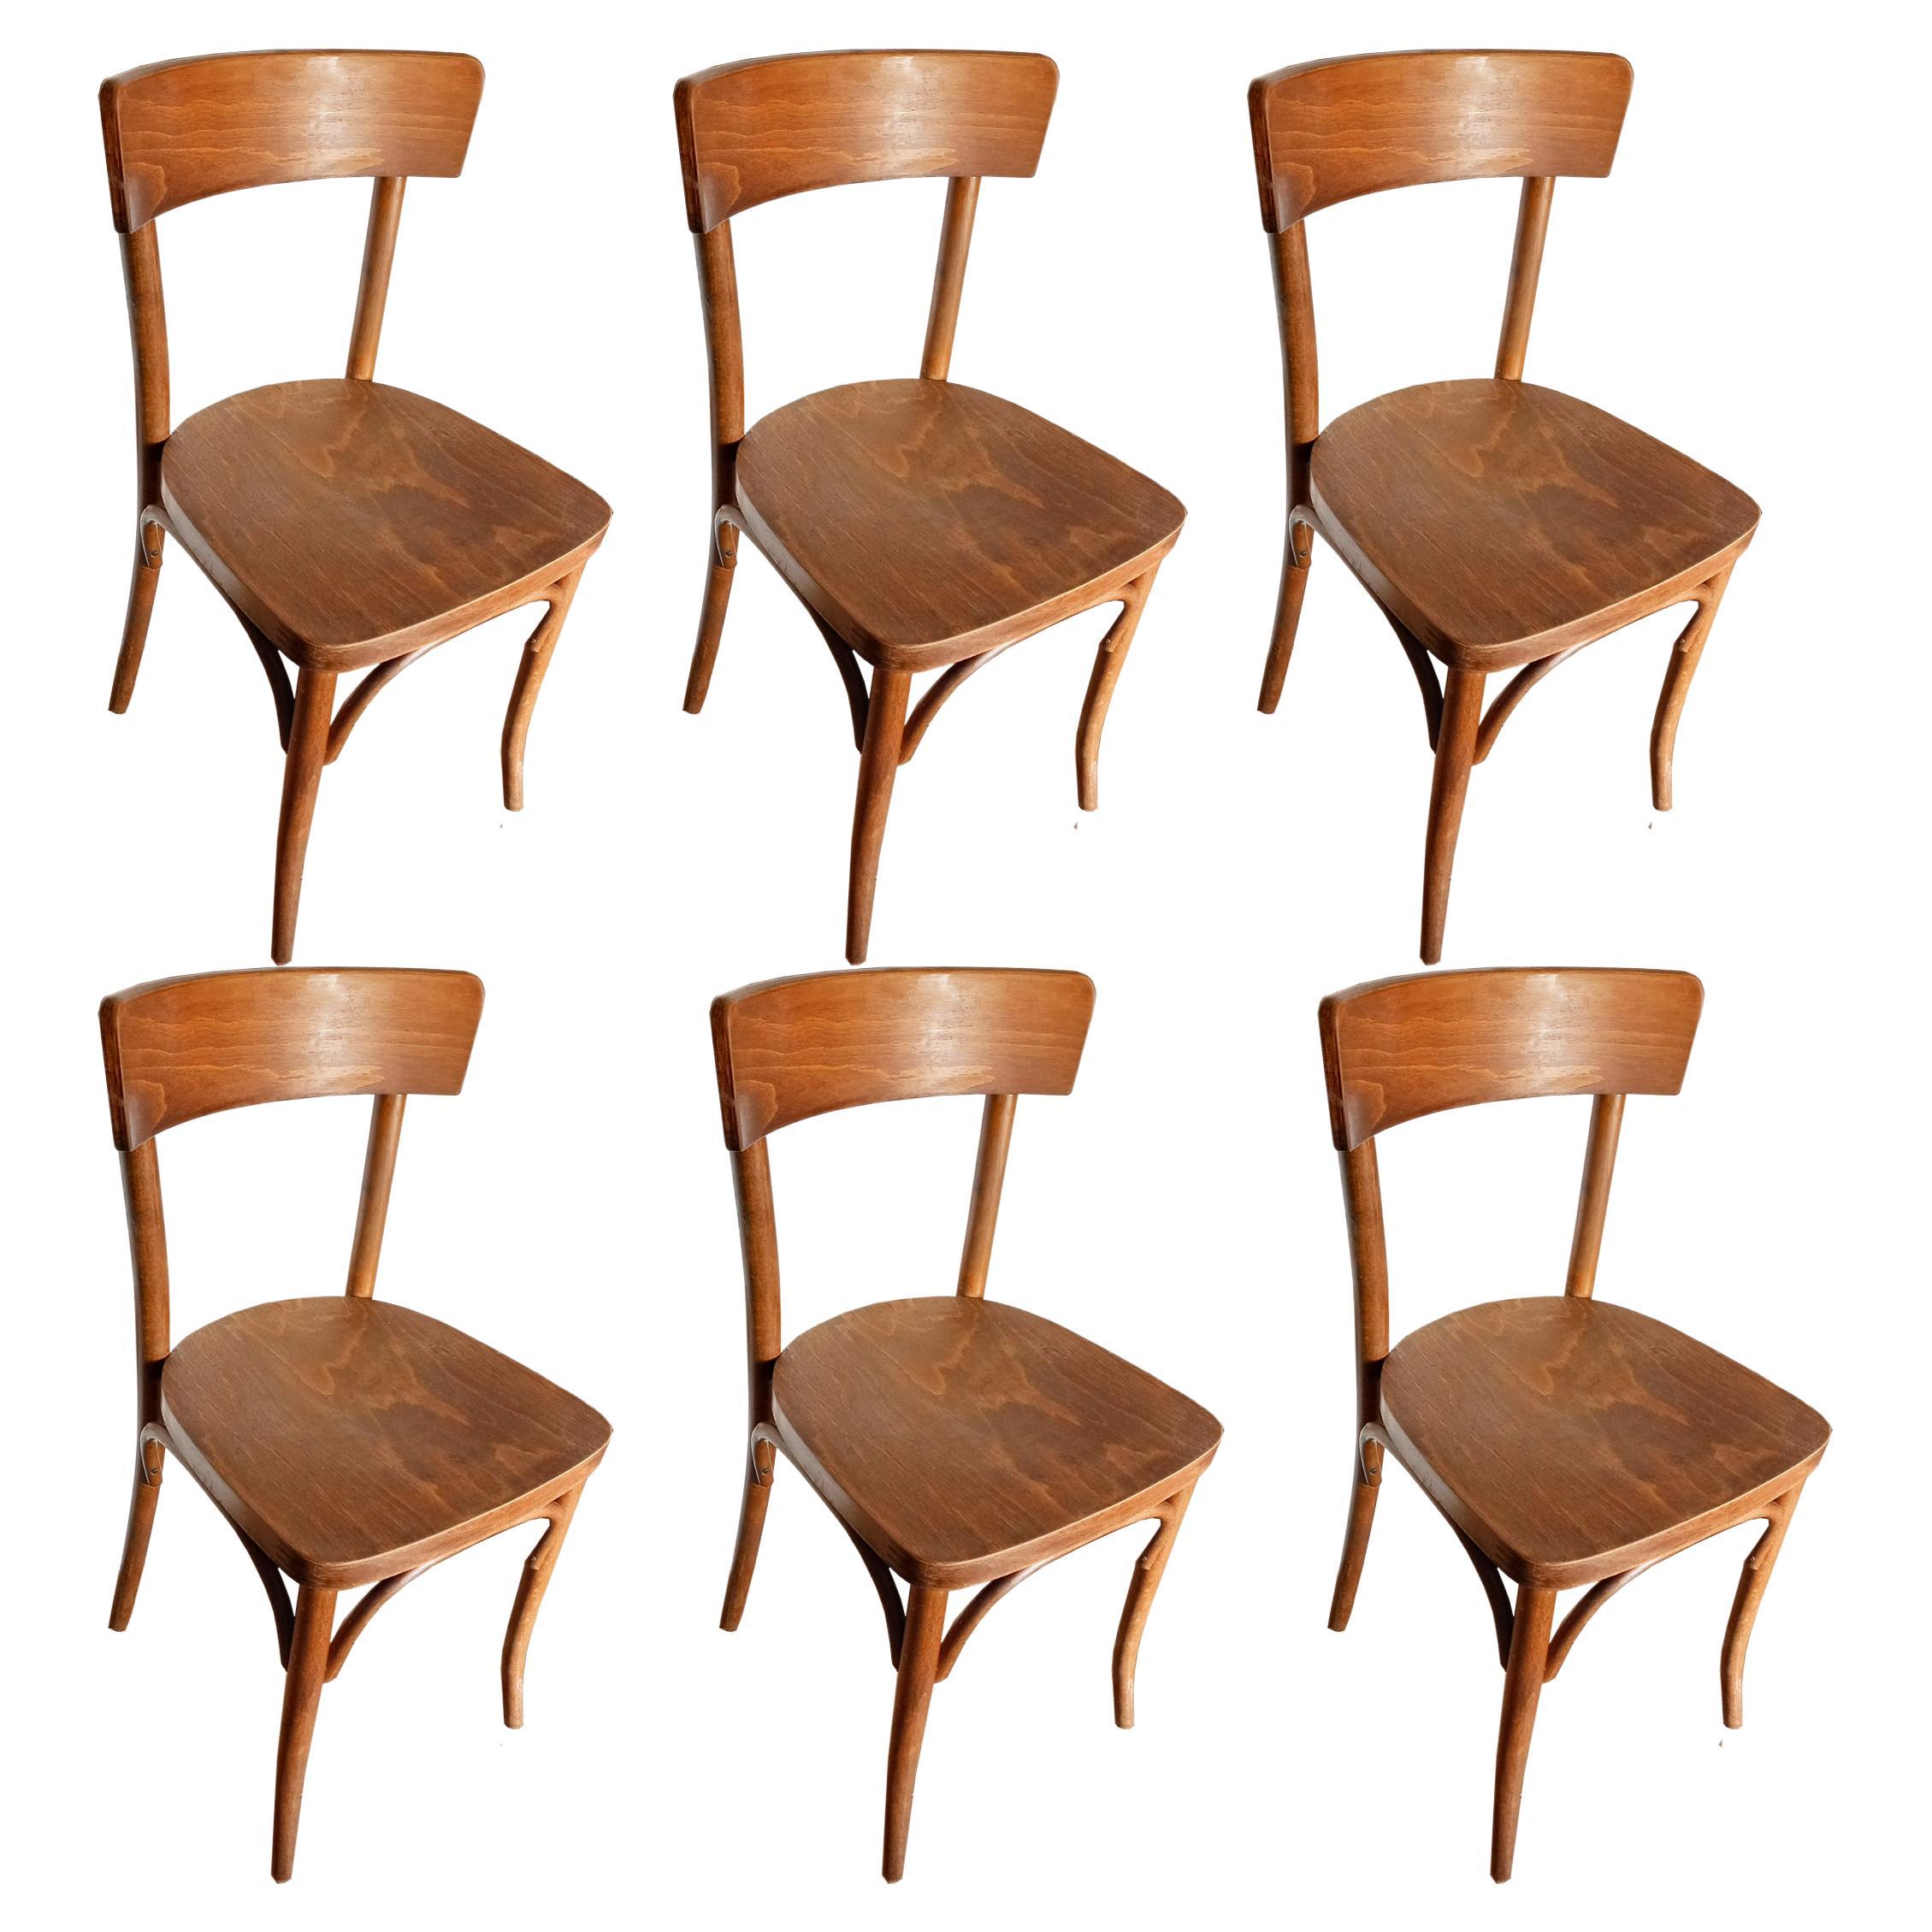 August Thonet Chairs, Set of 6, Czech Republic, 50s Signed Thonet For Sale